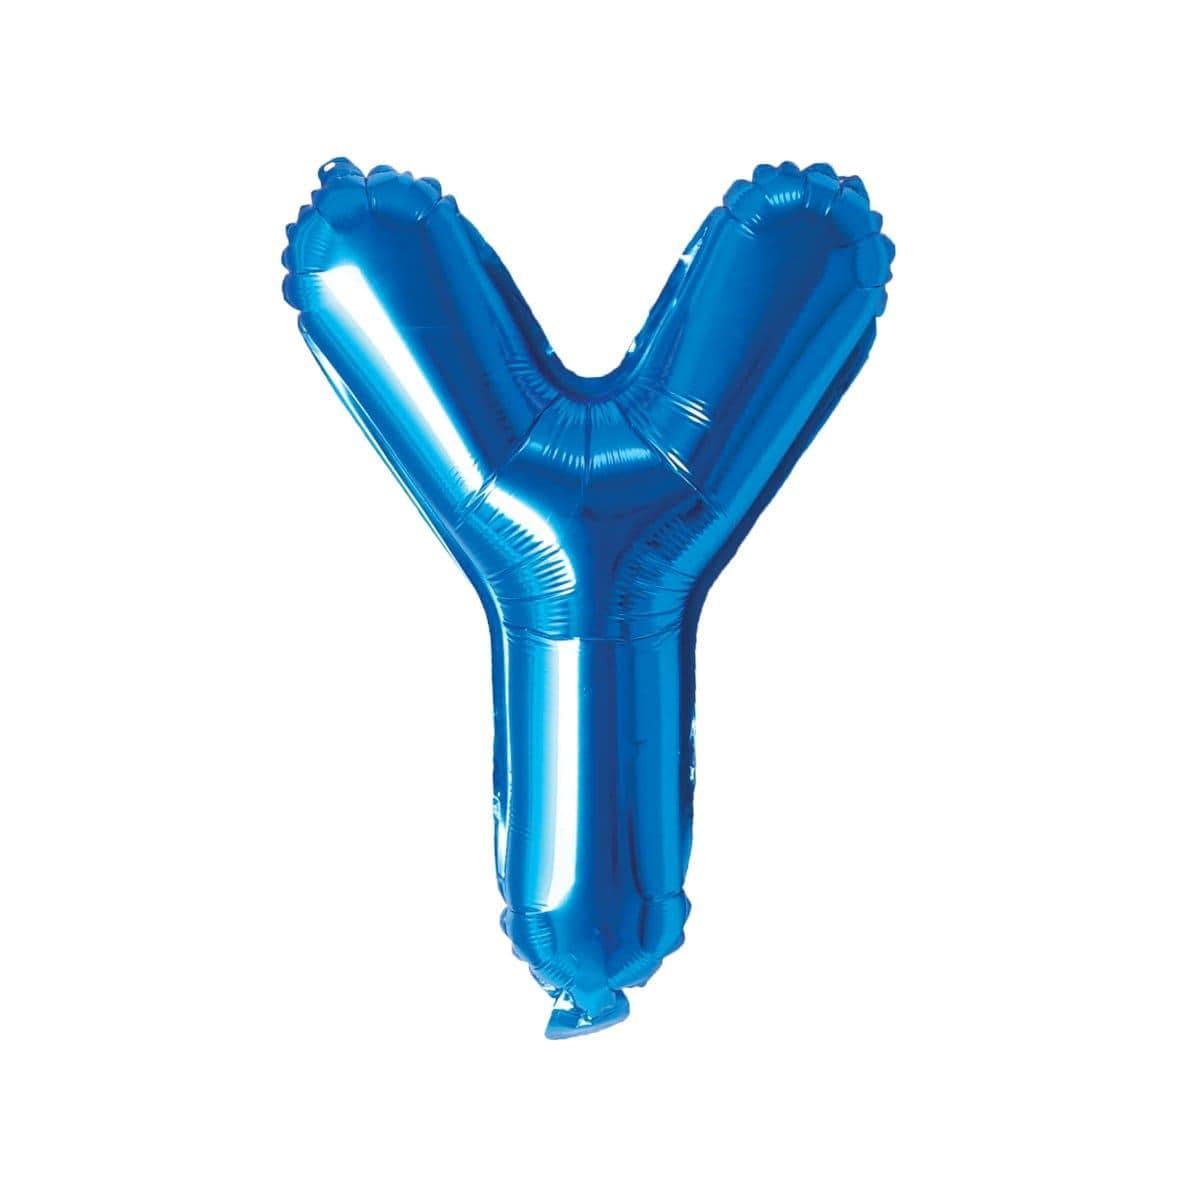 Buy Balloons Blue Letter Y Foil Balloon, 16 Inches sold at Party Expert